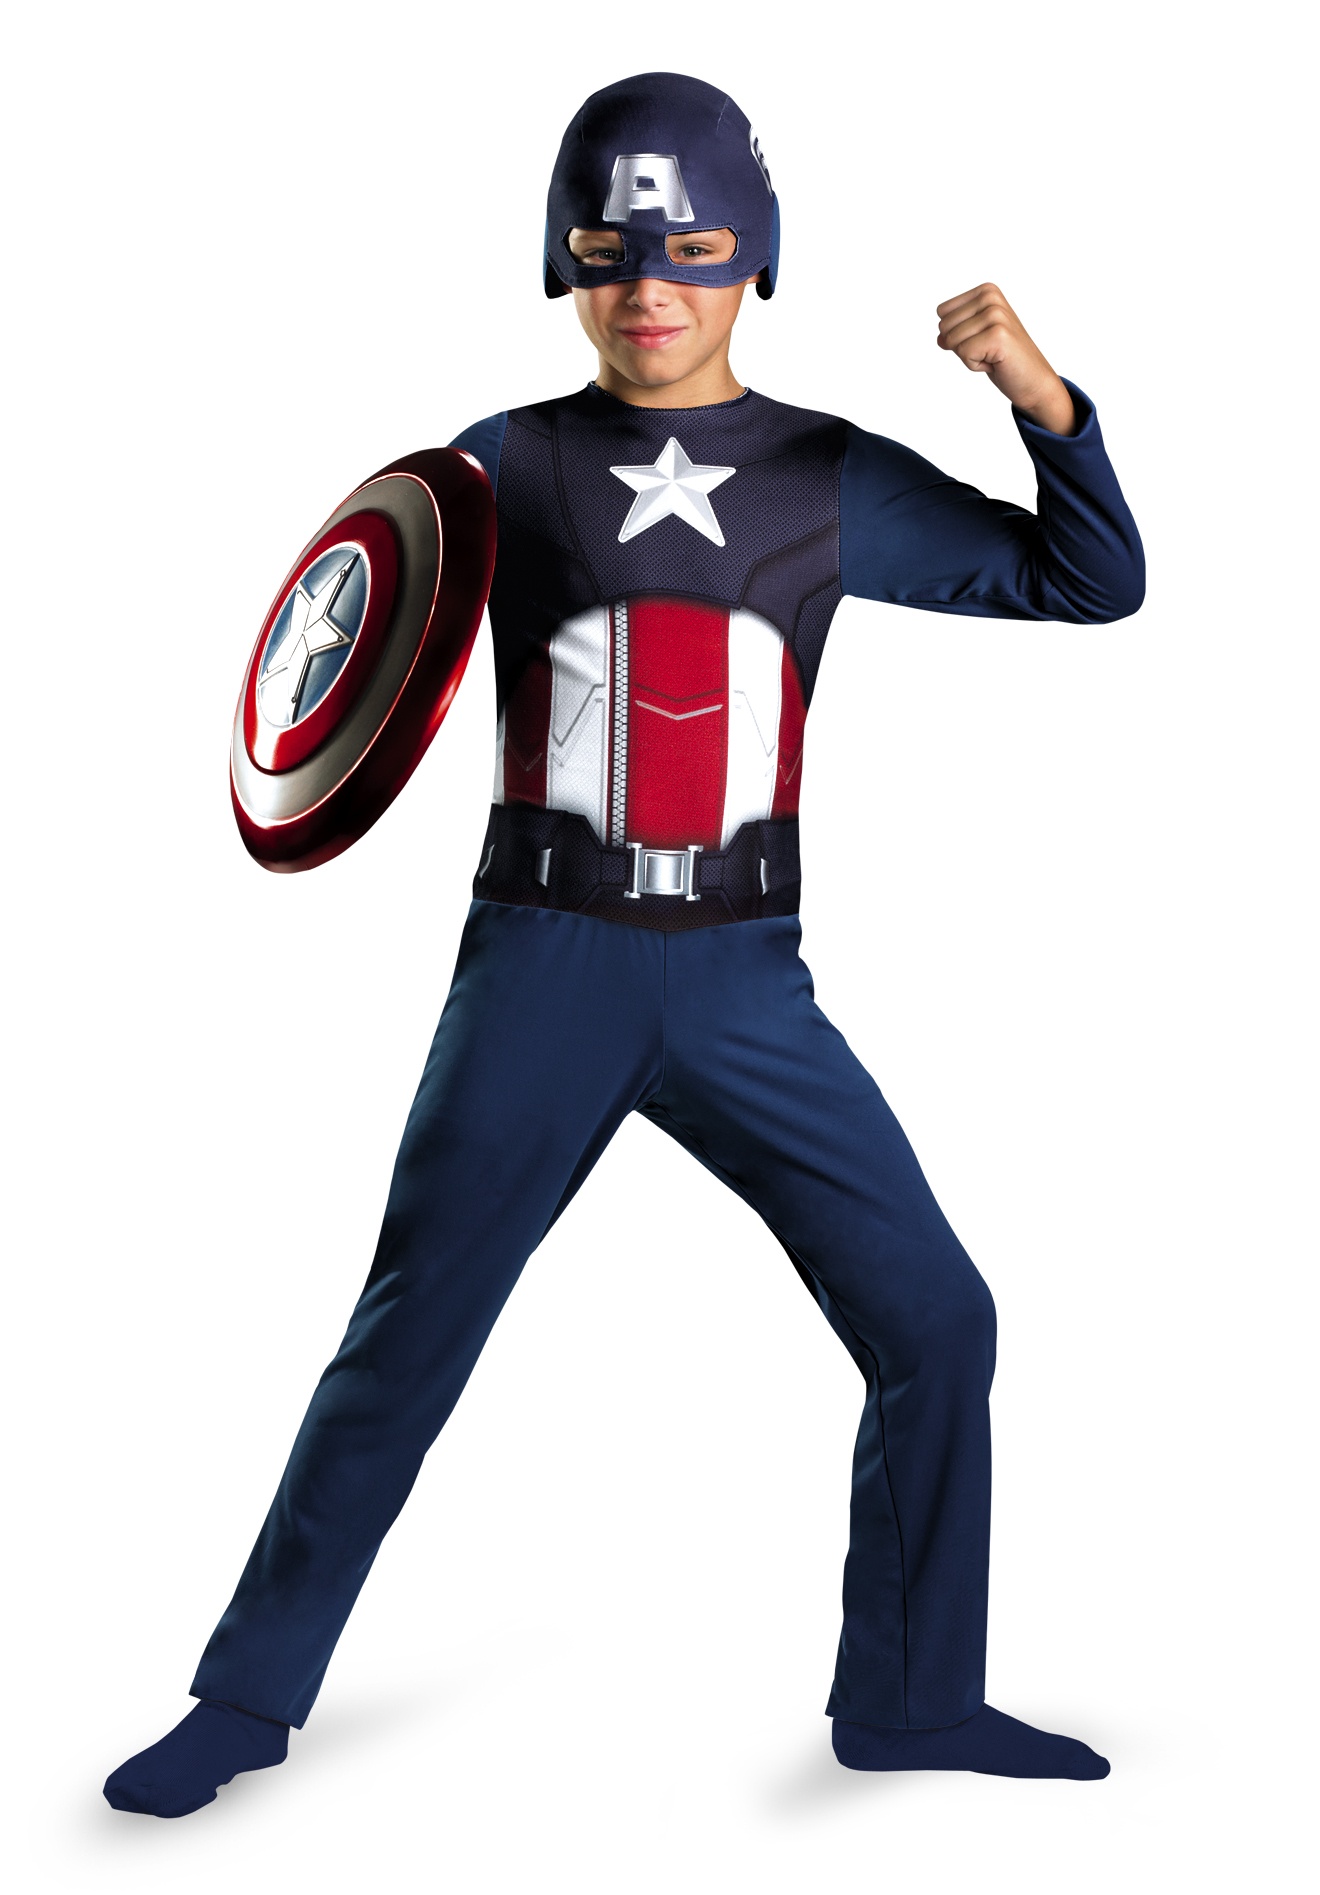 Geek insider, geekinsider, geekinsider. Com,, 10 geeky halloween costumes for kids, living